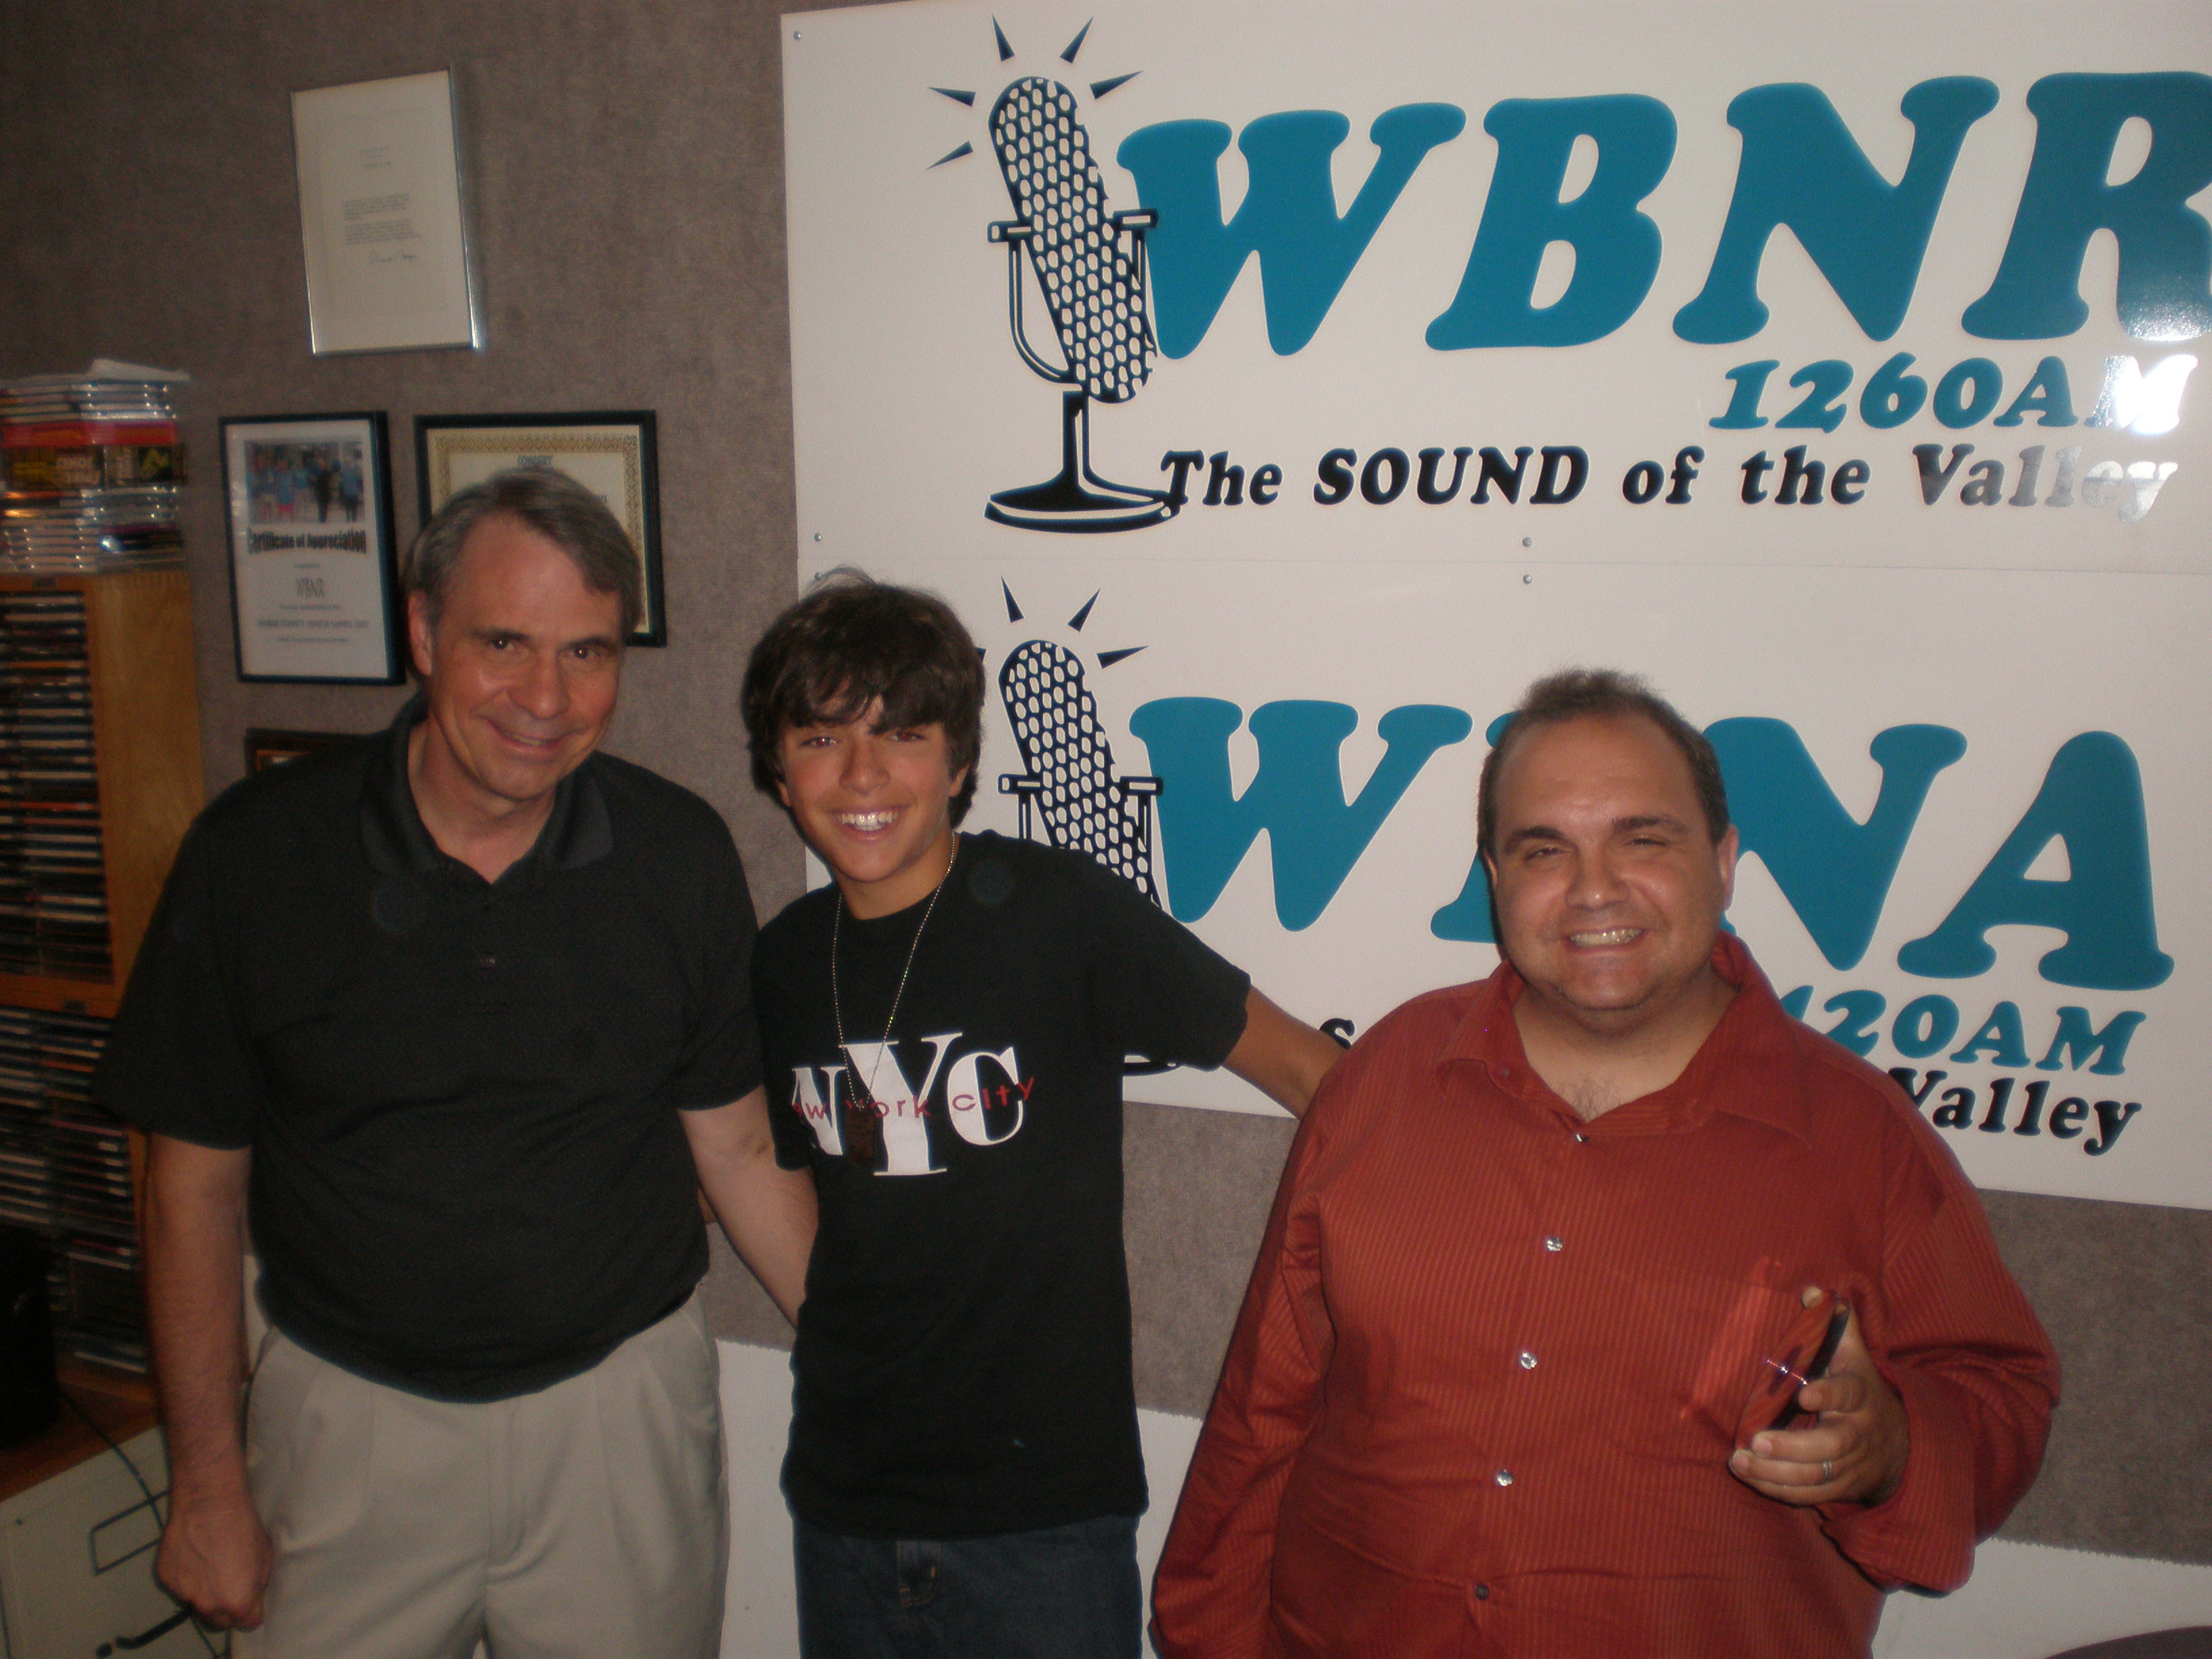 Christopher's RADIO Interview with Bruce Owens and Producer Jay Verzi 2012